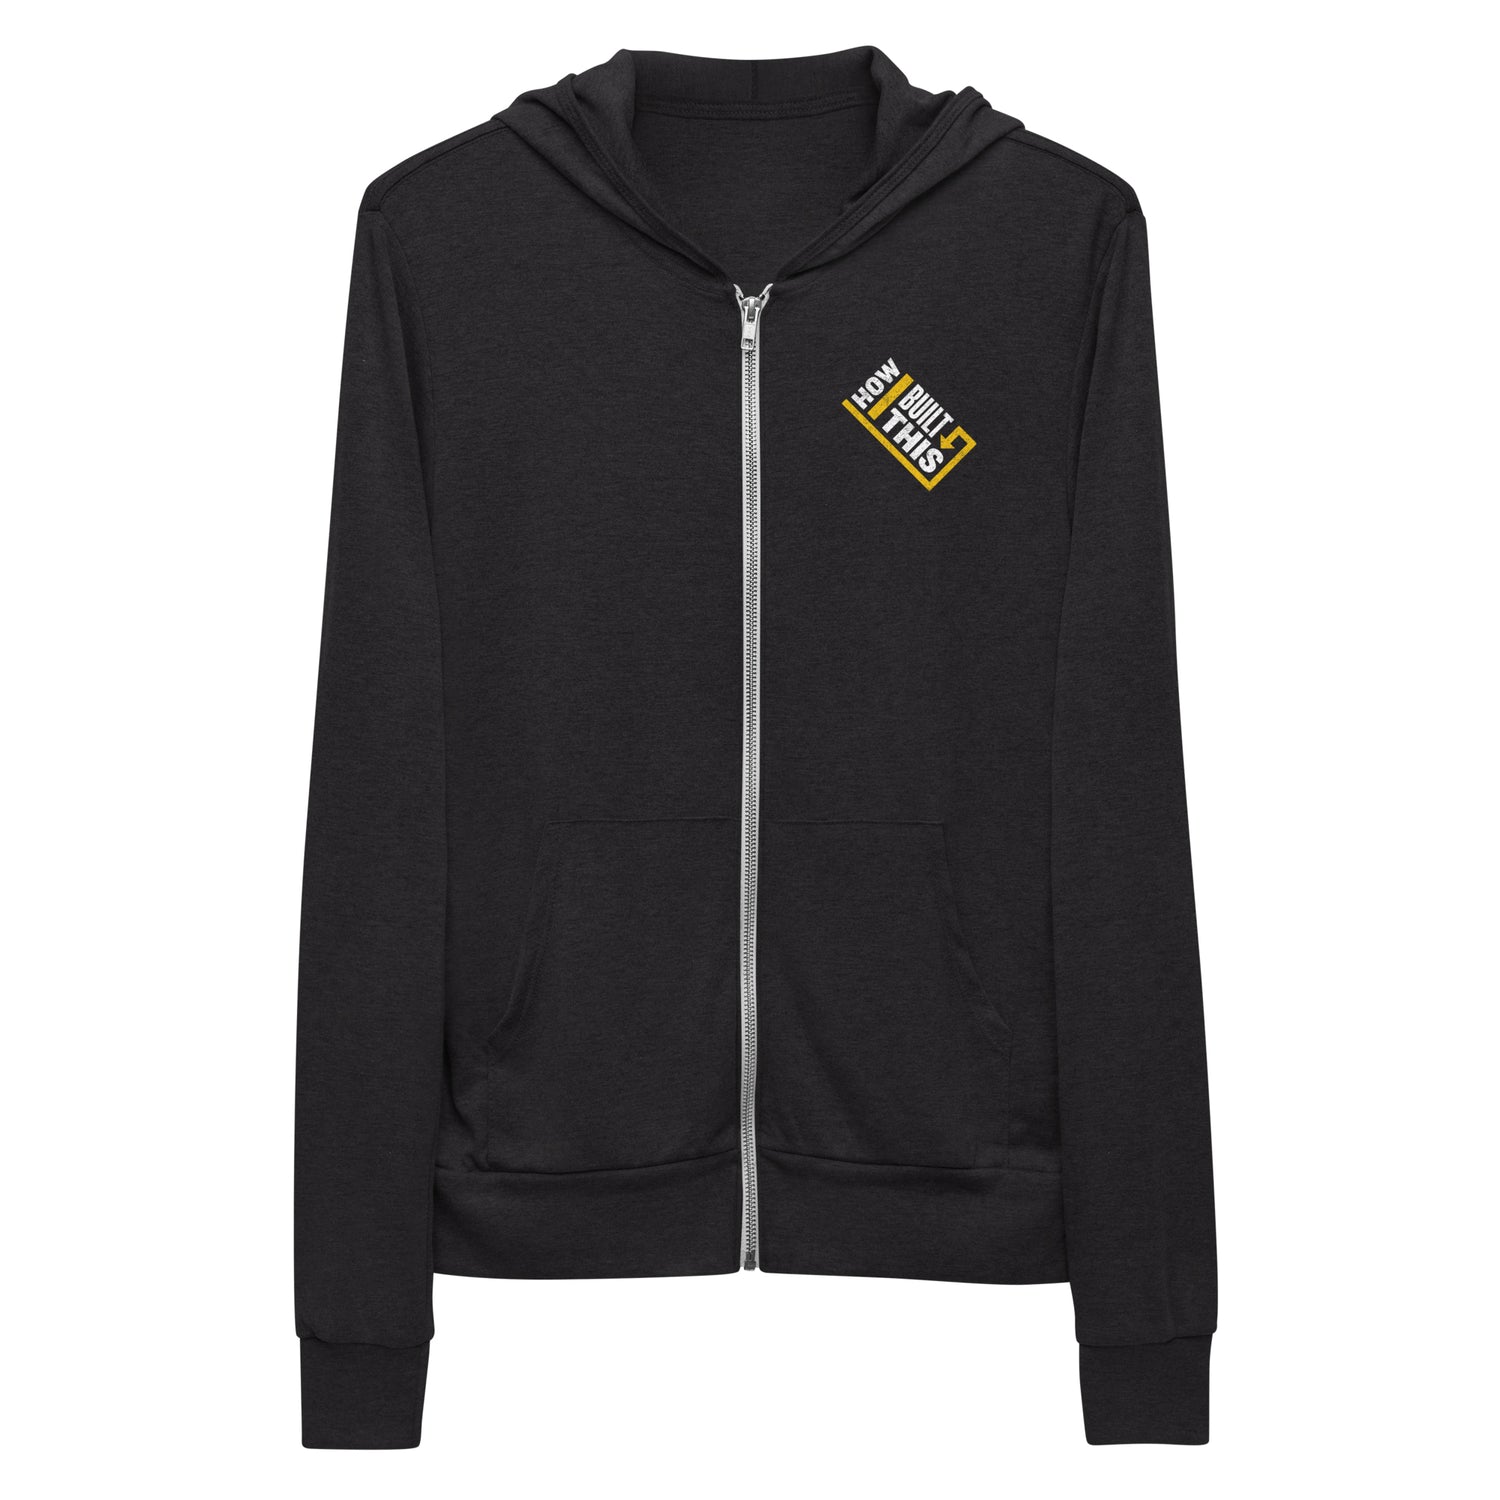 How I Built This Distressed Logo Unisex Tri-Blend Zip-Up Hooded Sweatshirt